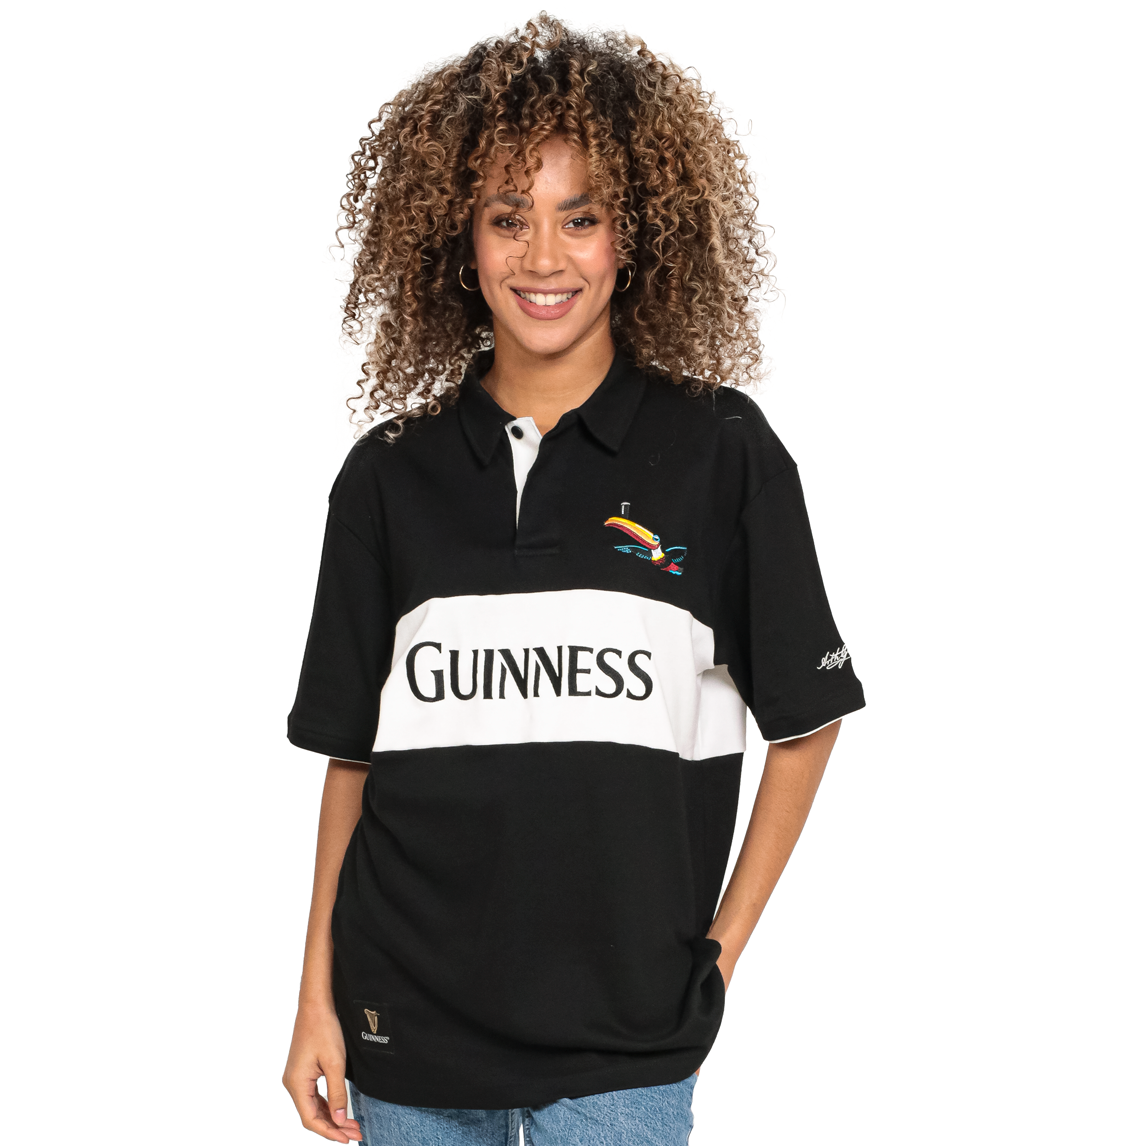 A woman wearing a Guinness Black and White Toucan Short Sleeve Rugby T-Shirt.